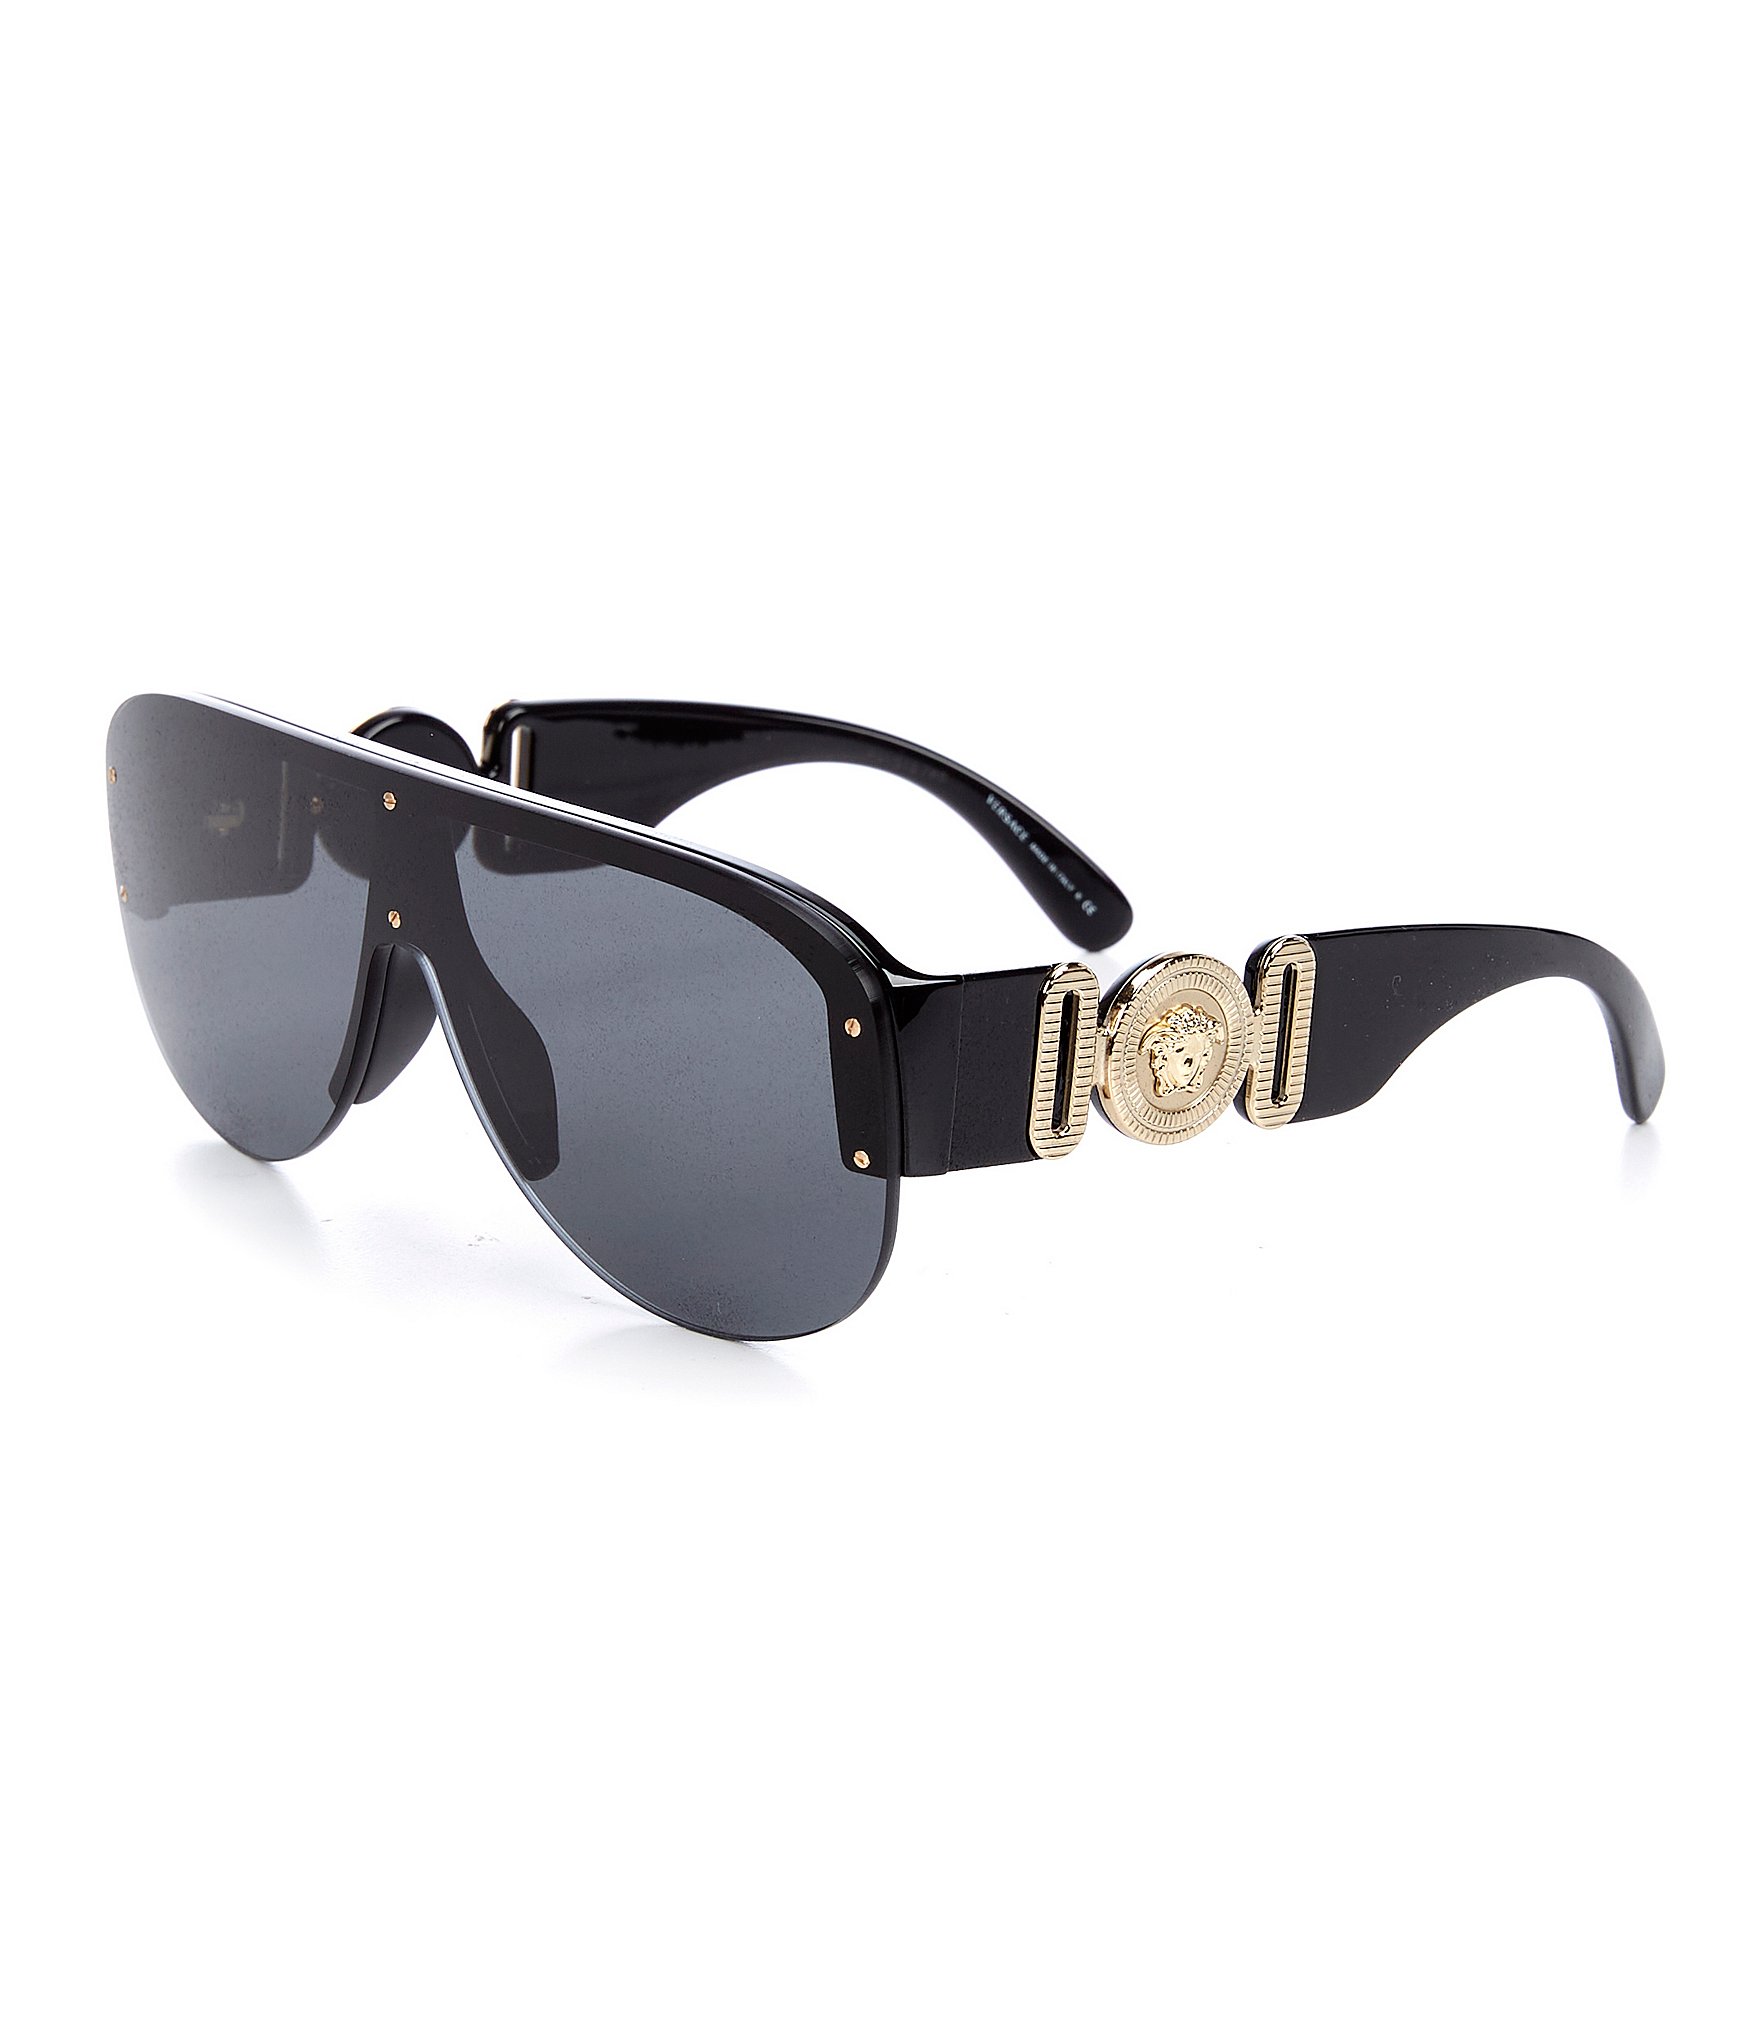 Total 58+ imagen pictures of versace glasses - Ecover.mx